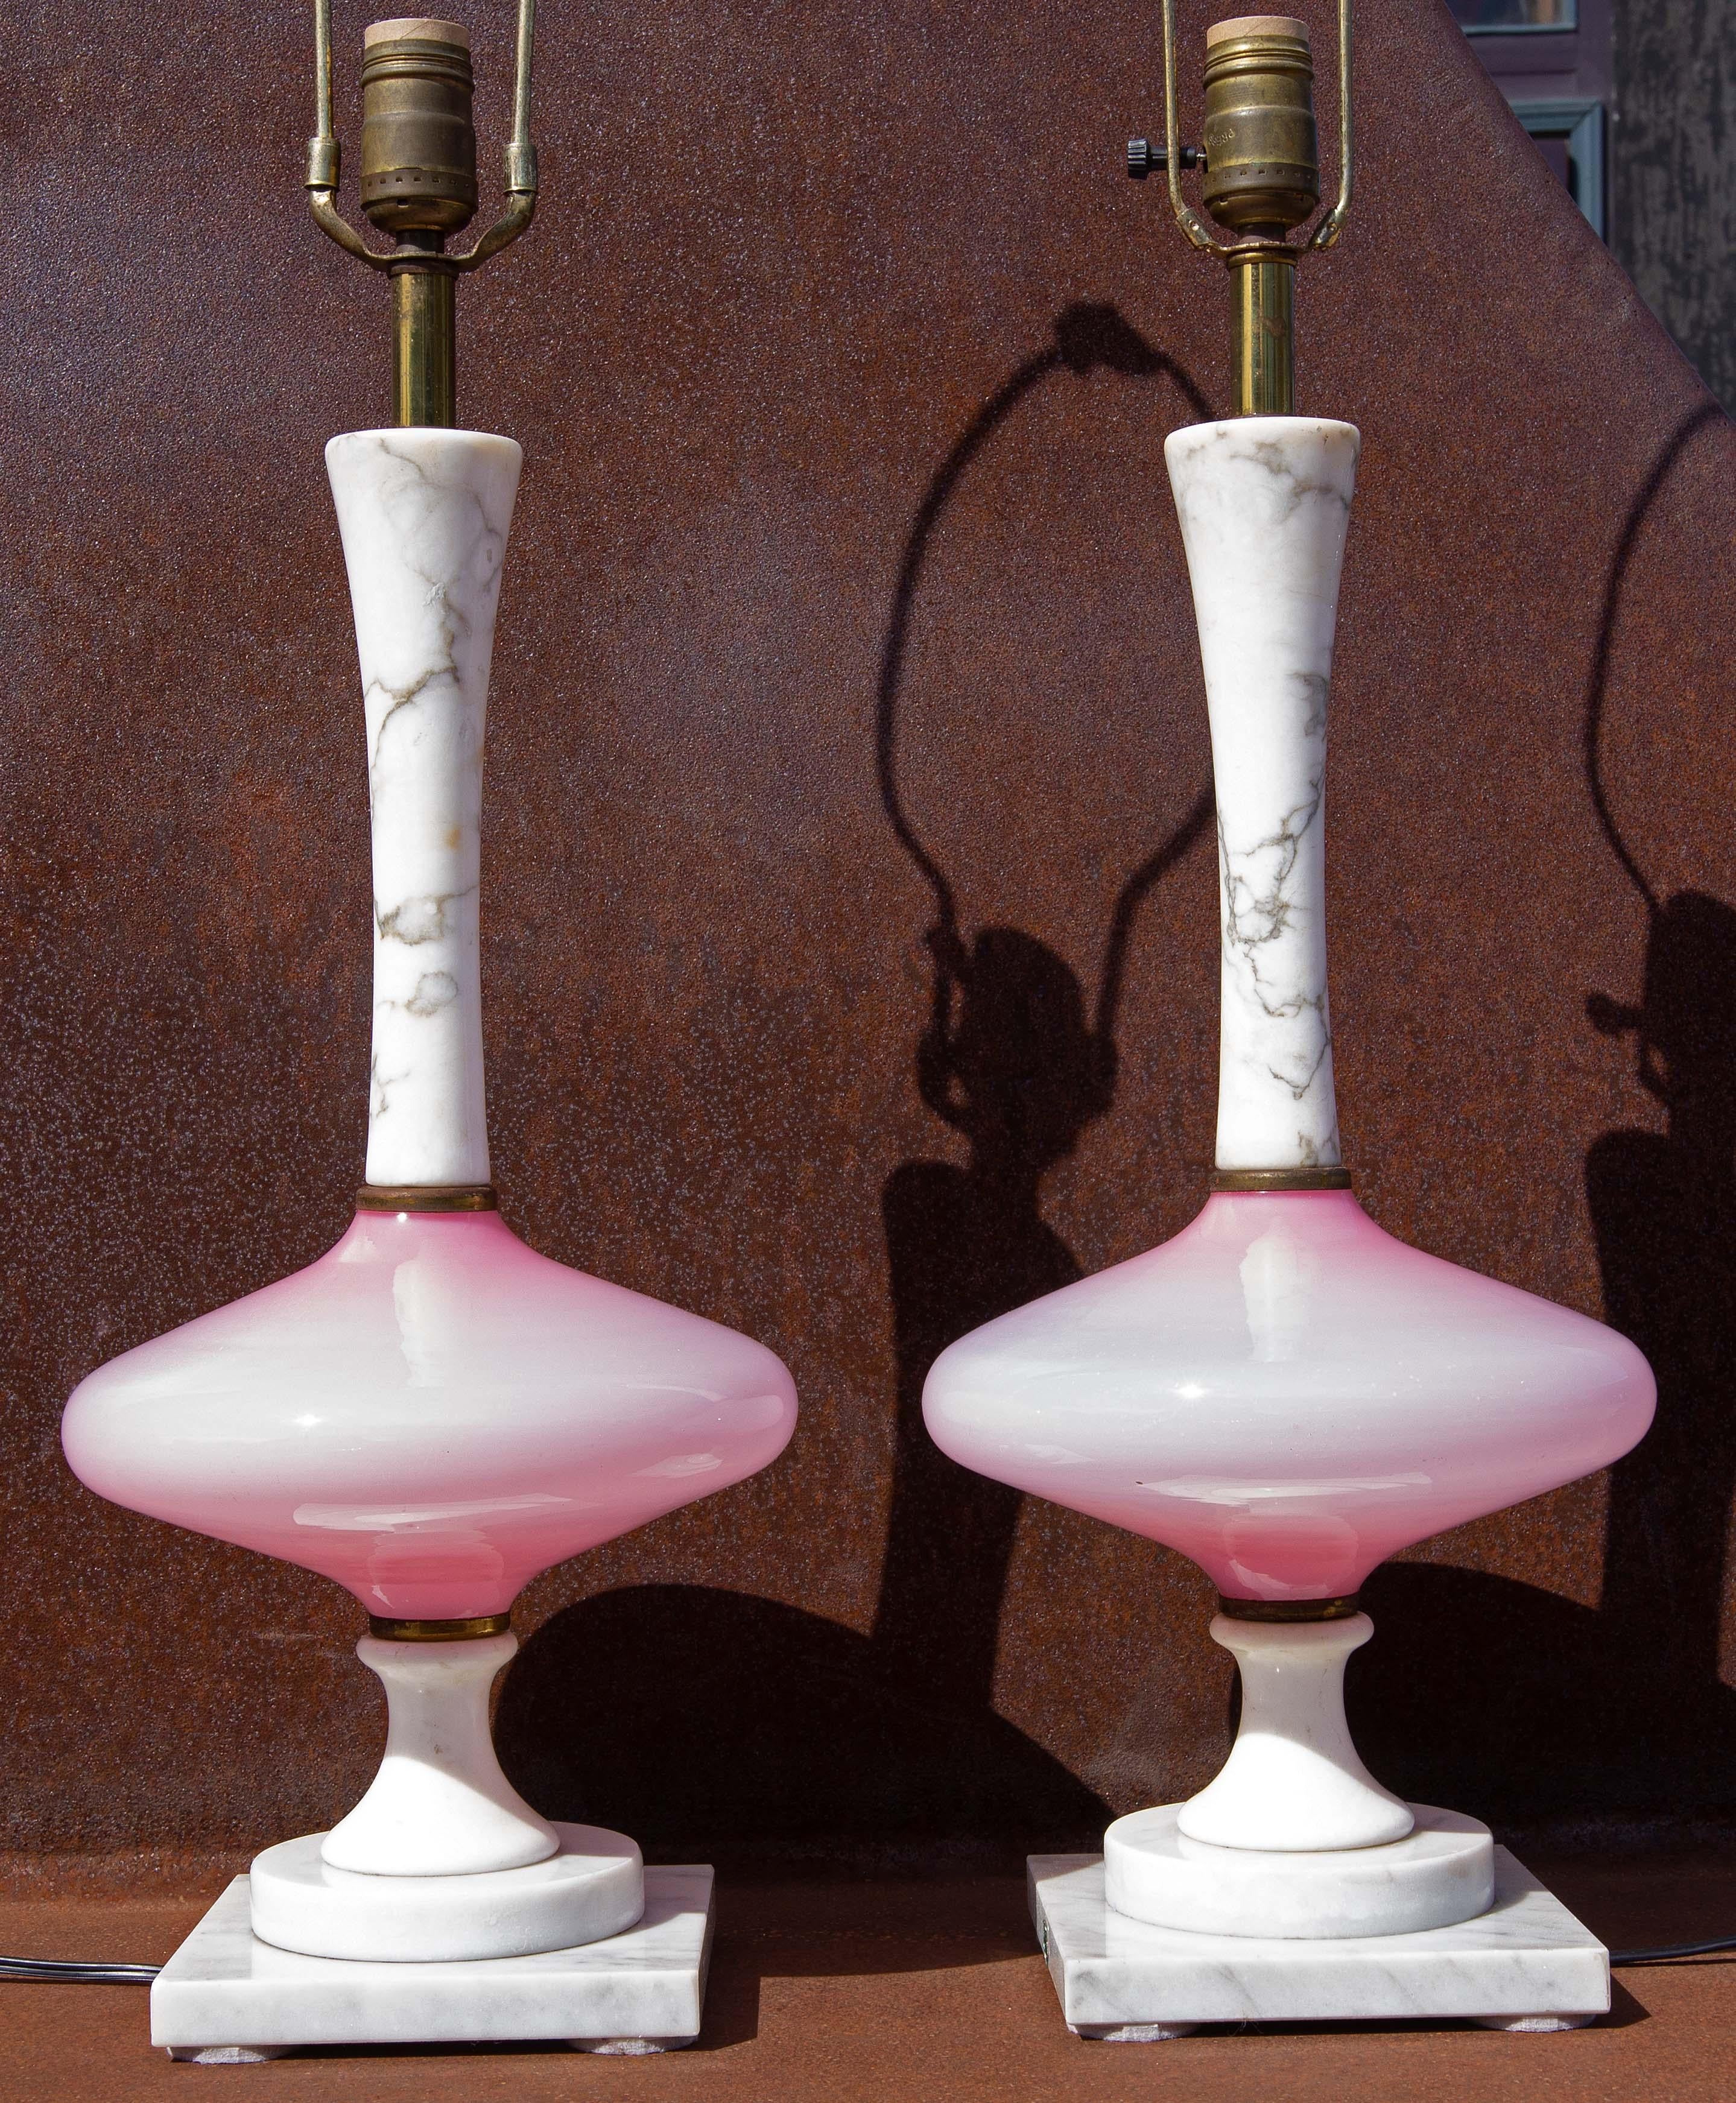 Pair of pink Murano glass and marble lamps. Very elegant form, circa 1960s. Height to top of marble is 18.5